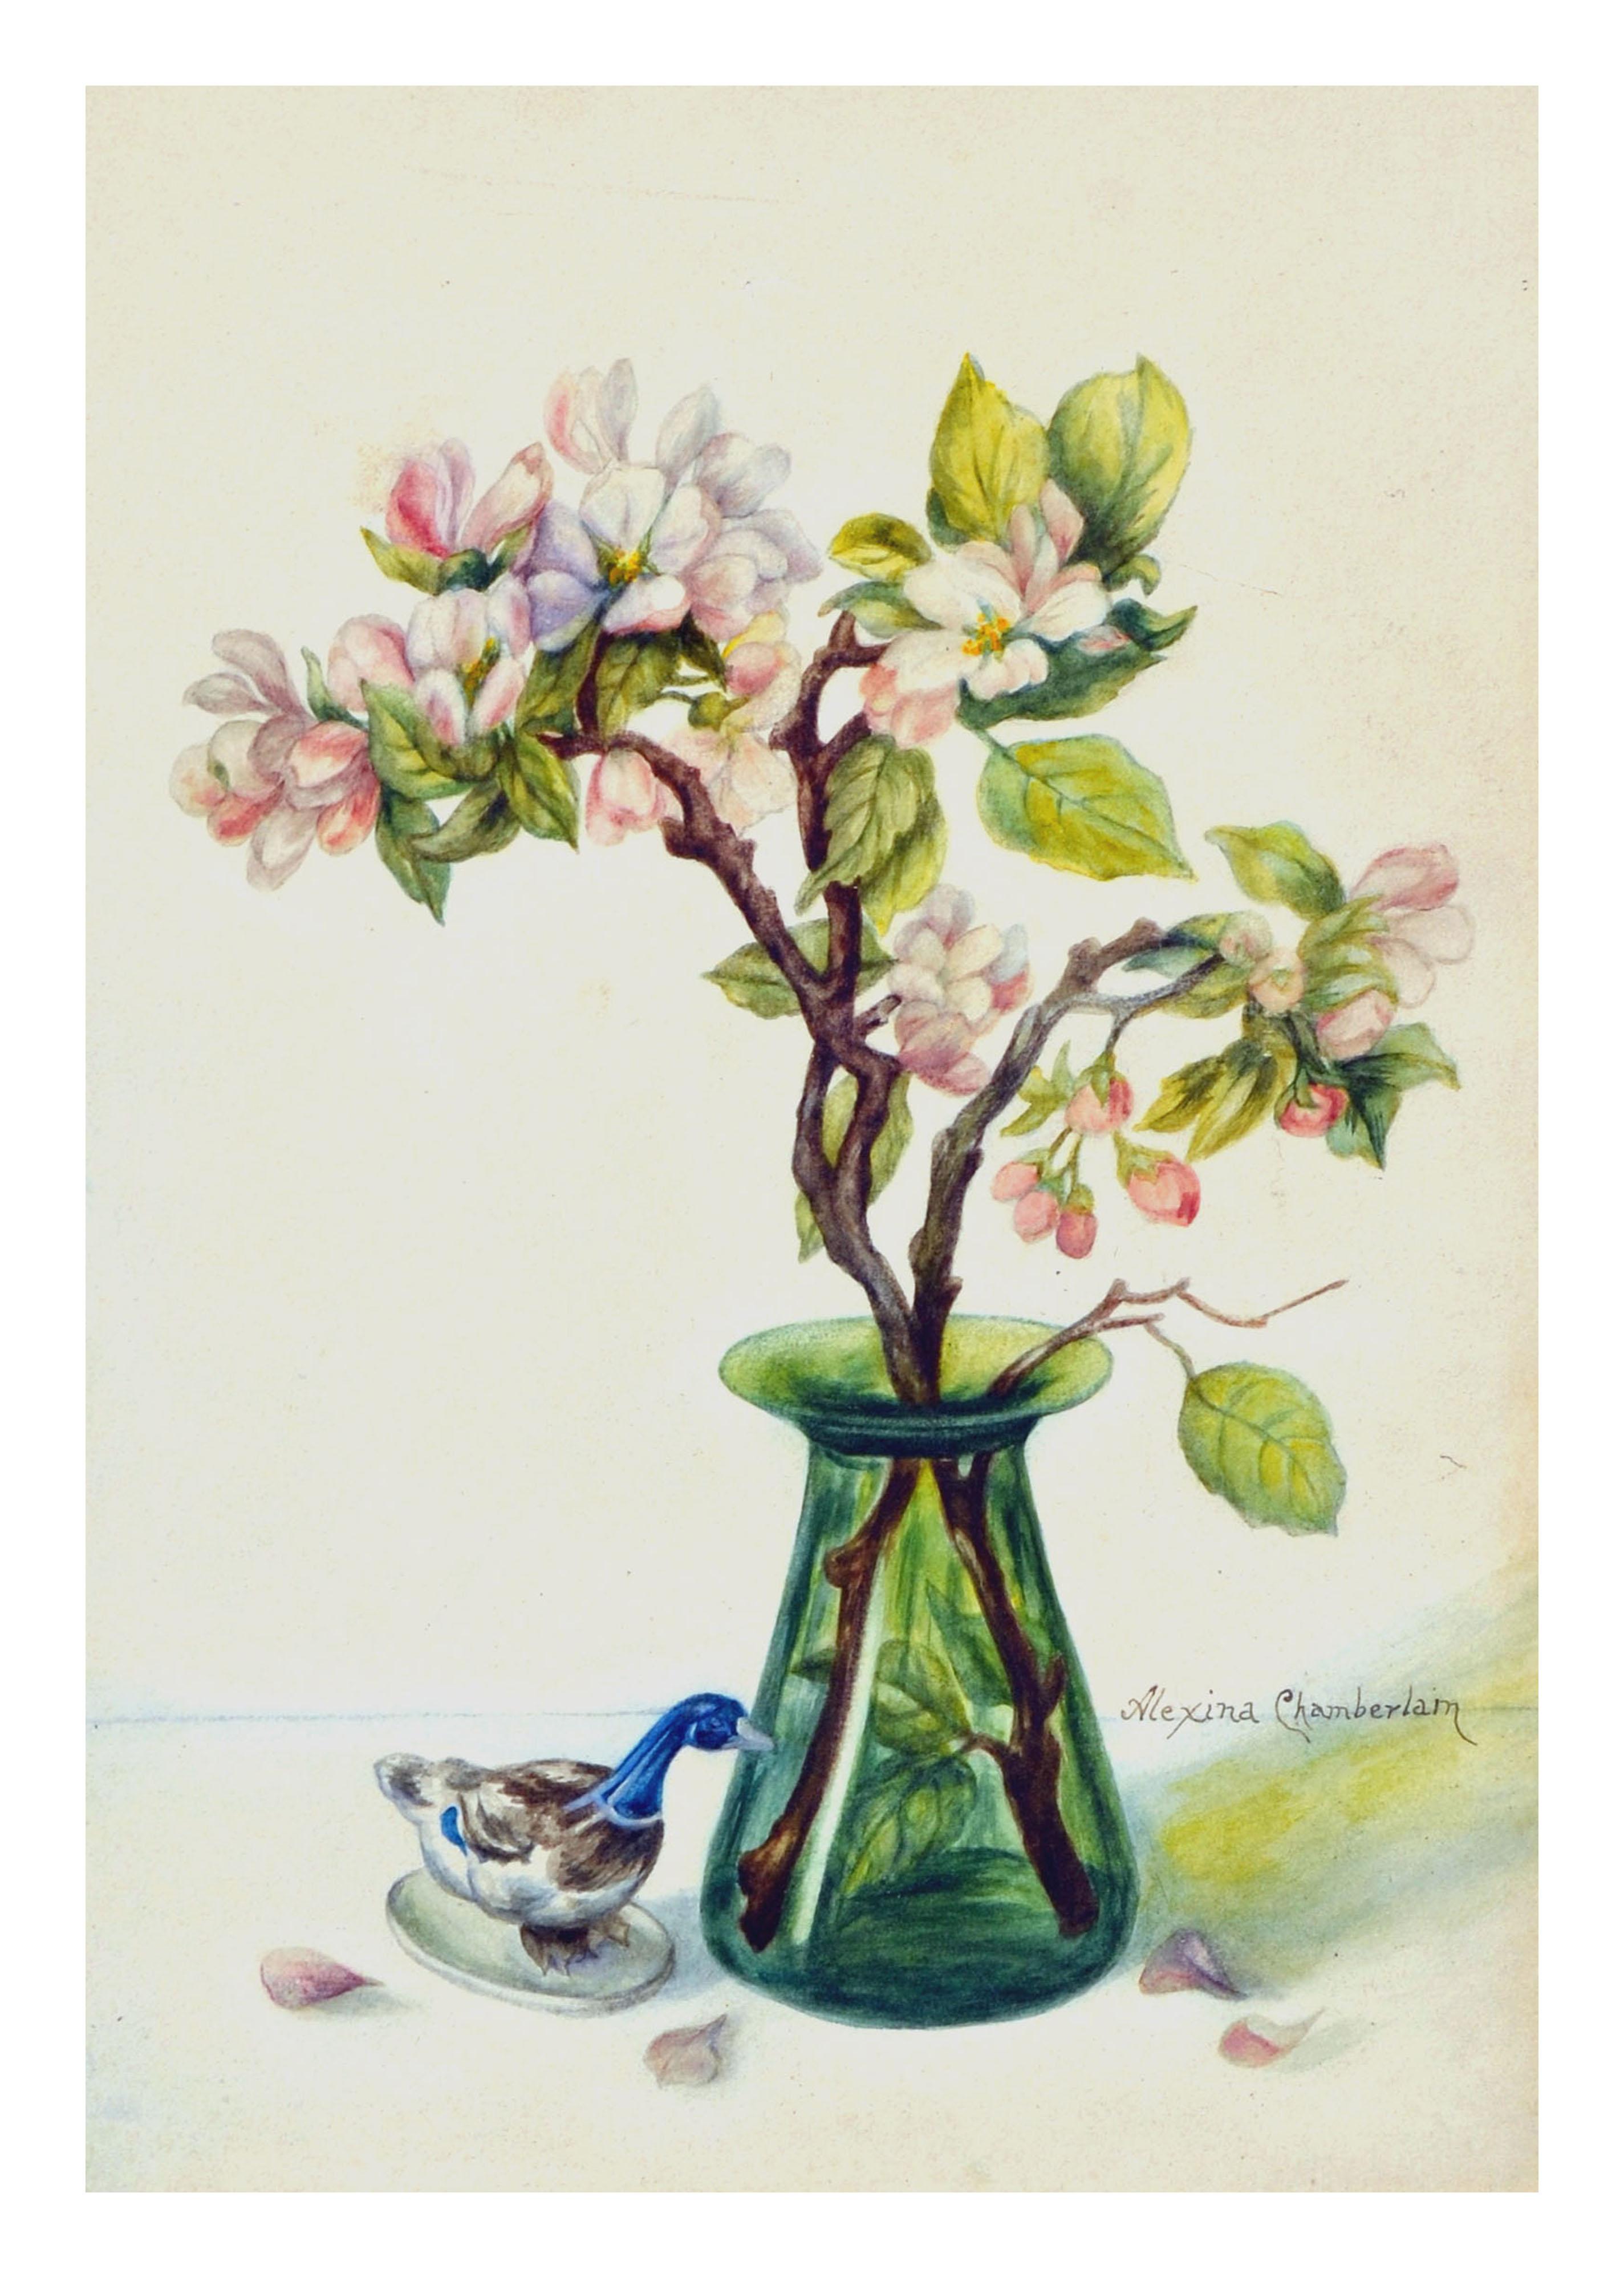 Floral Still-Life with Magnolias & Goose  - Art by Alexina Chamberlain